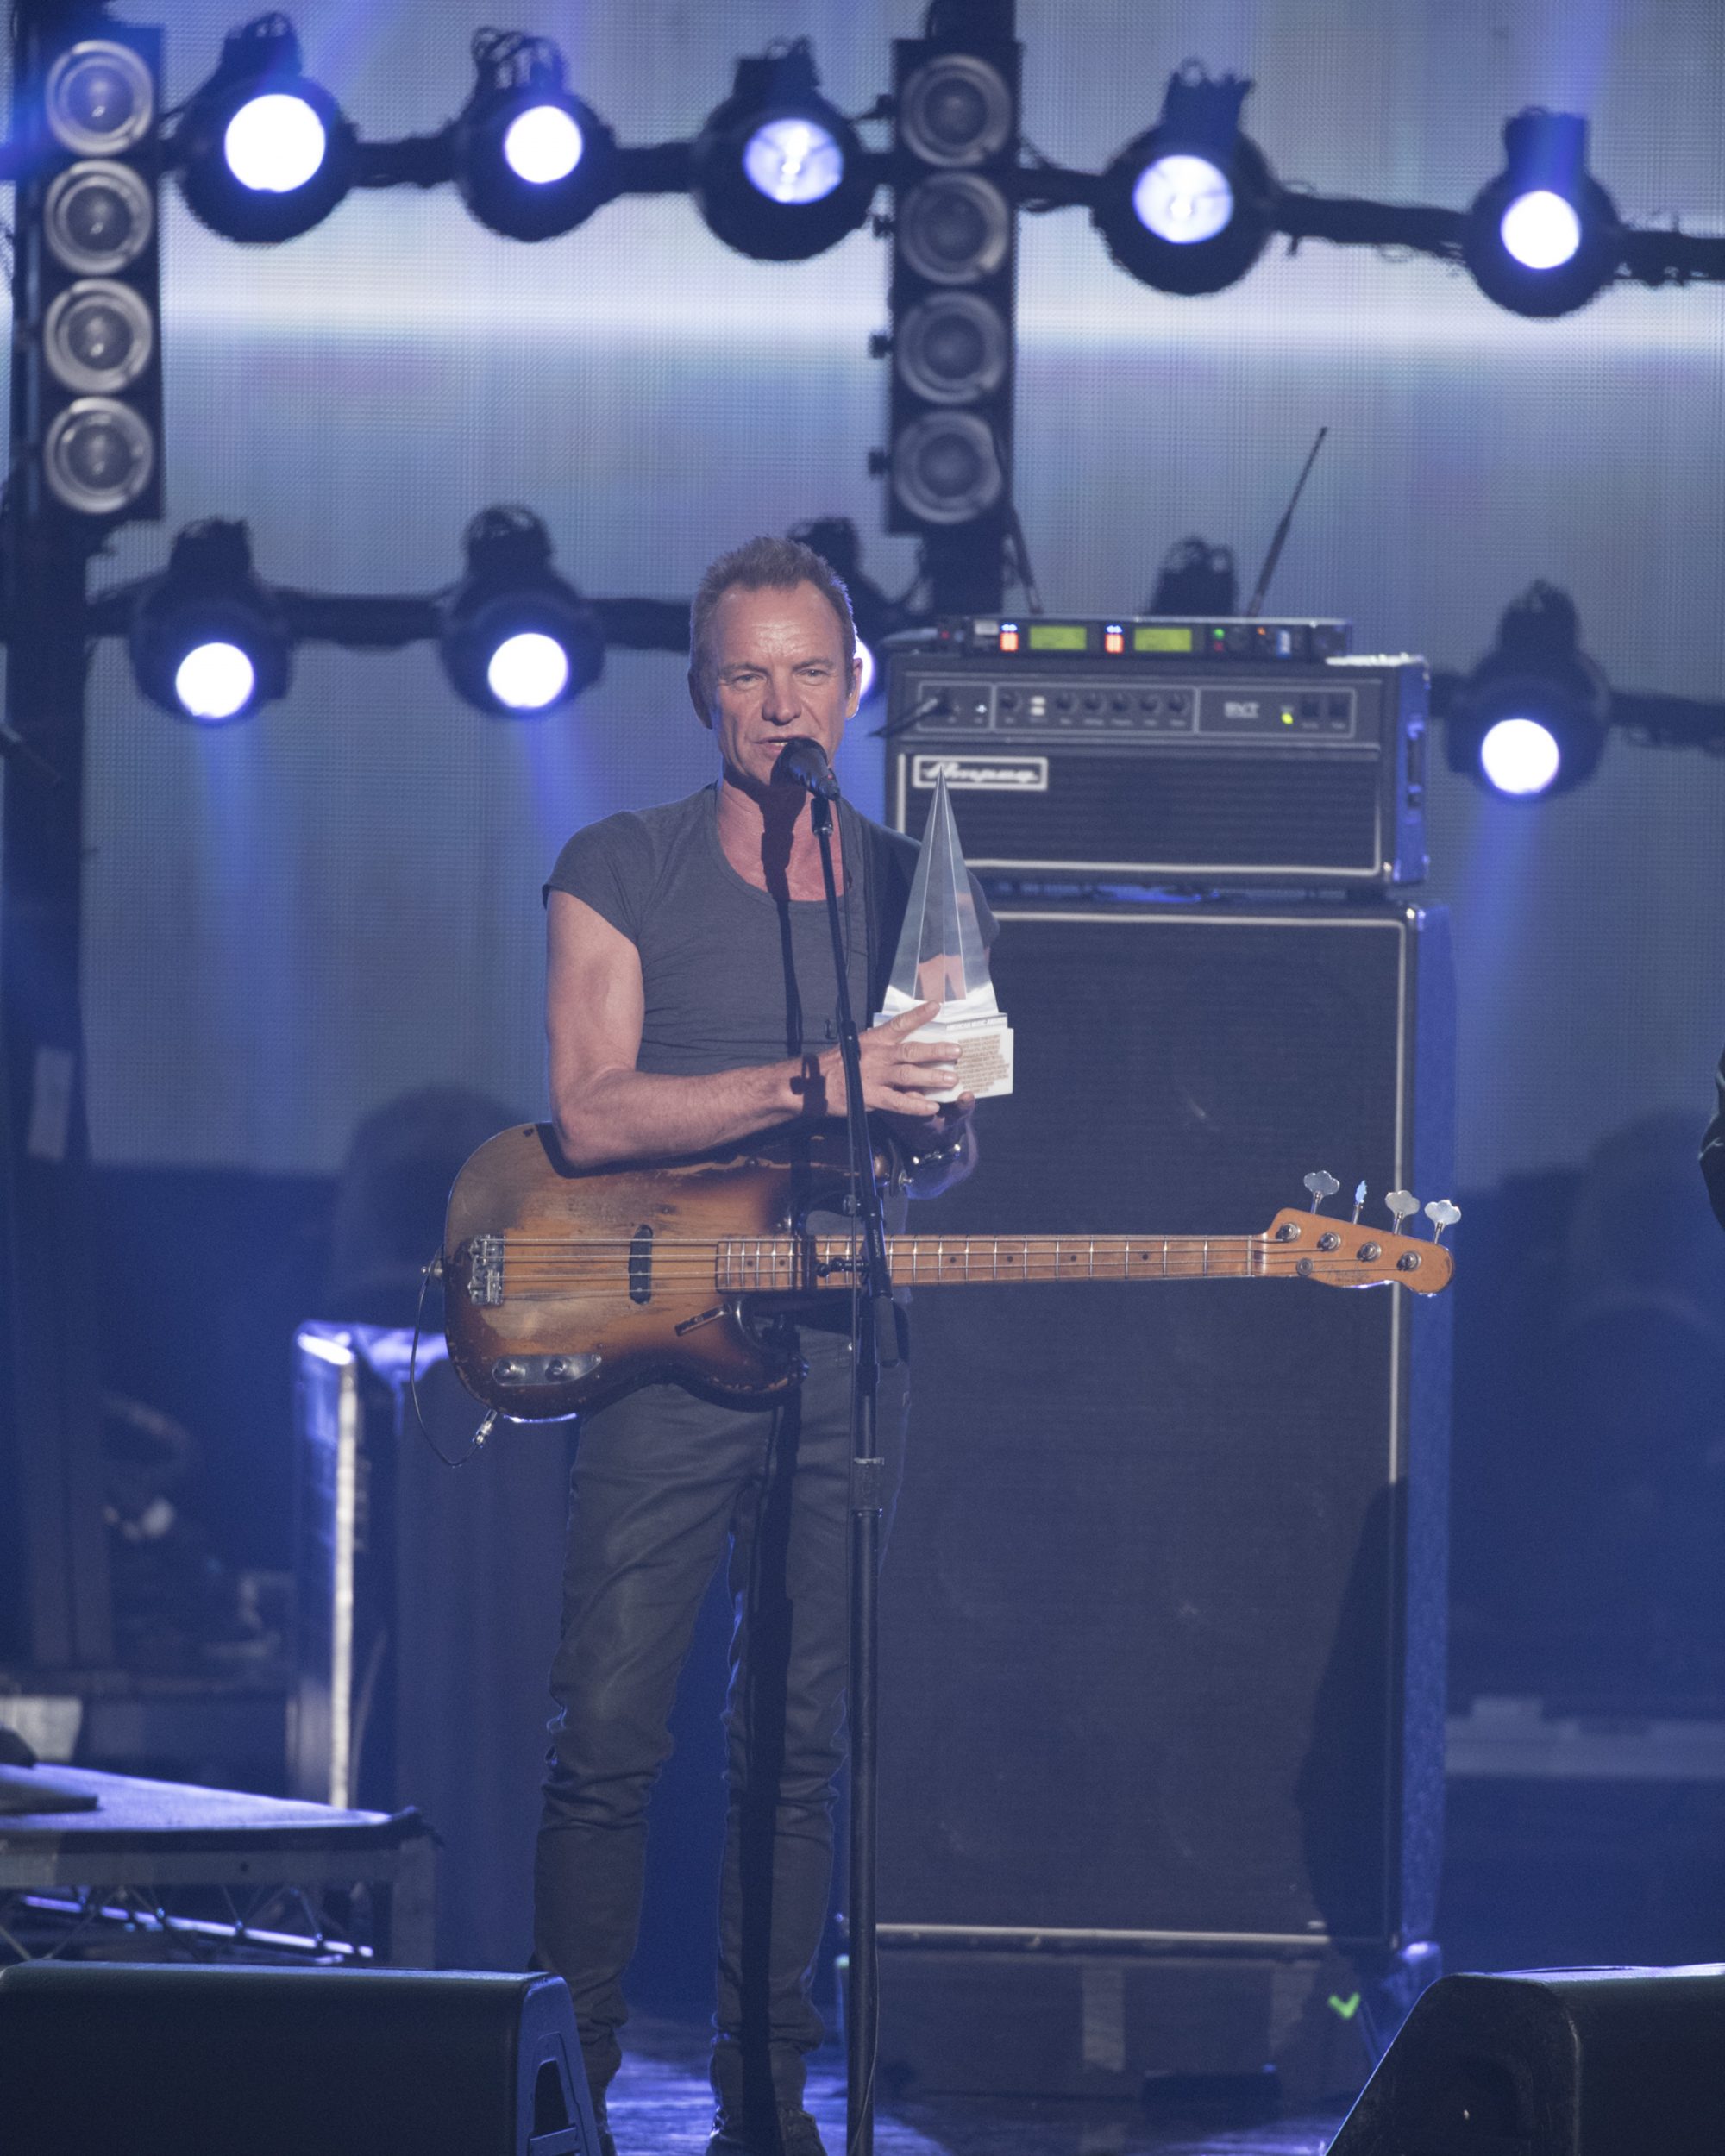 THE 2016 AMERICAN MUSIC AWARDS(r) - The “2016 American Music Awards,” the world’s biggest fan-voted award show, broadcasts live from the Microsoft Theater in Los Angeles on SUNDAY, NOVEMBER 20, at 8:00 p.m. EST, on ABC. (Image Group LA/ABC) STING